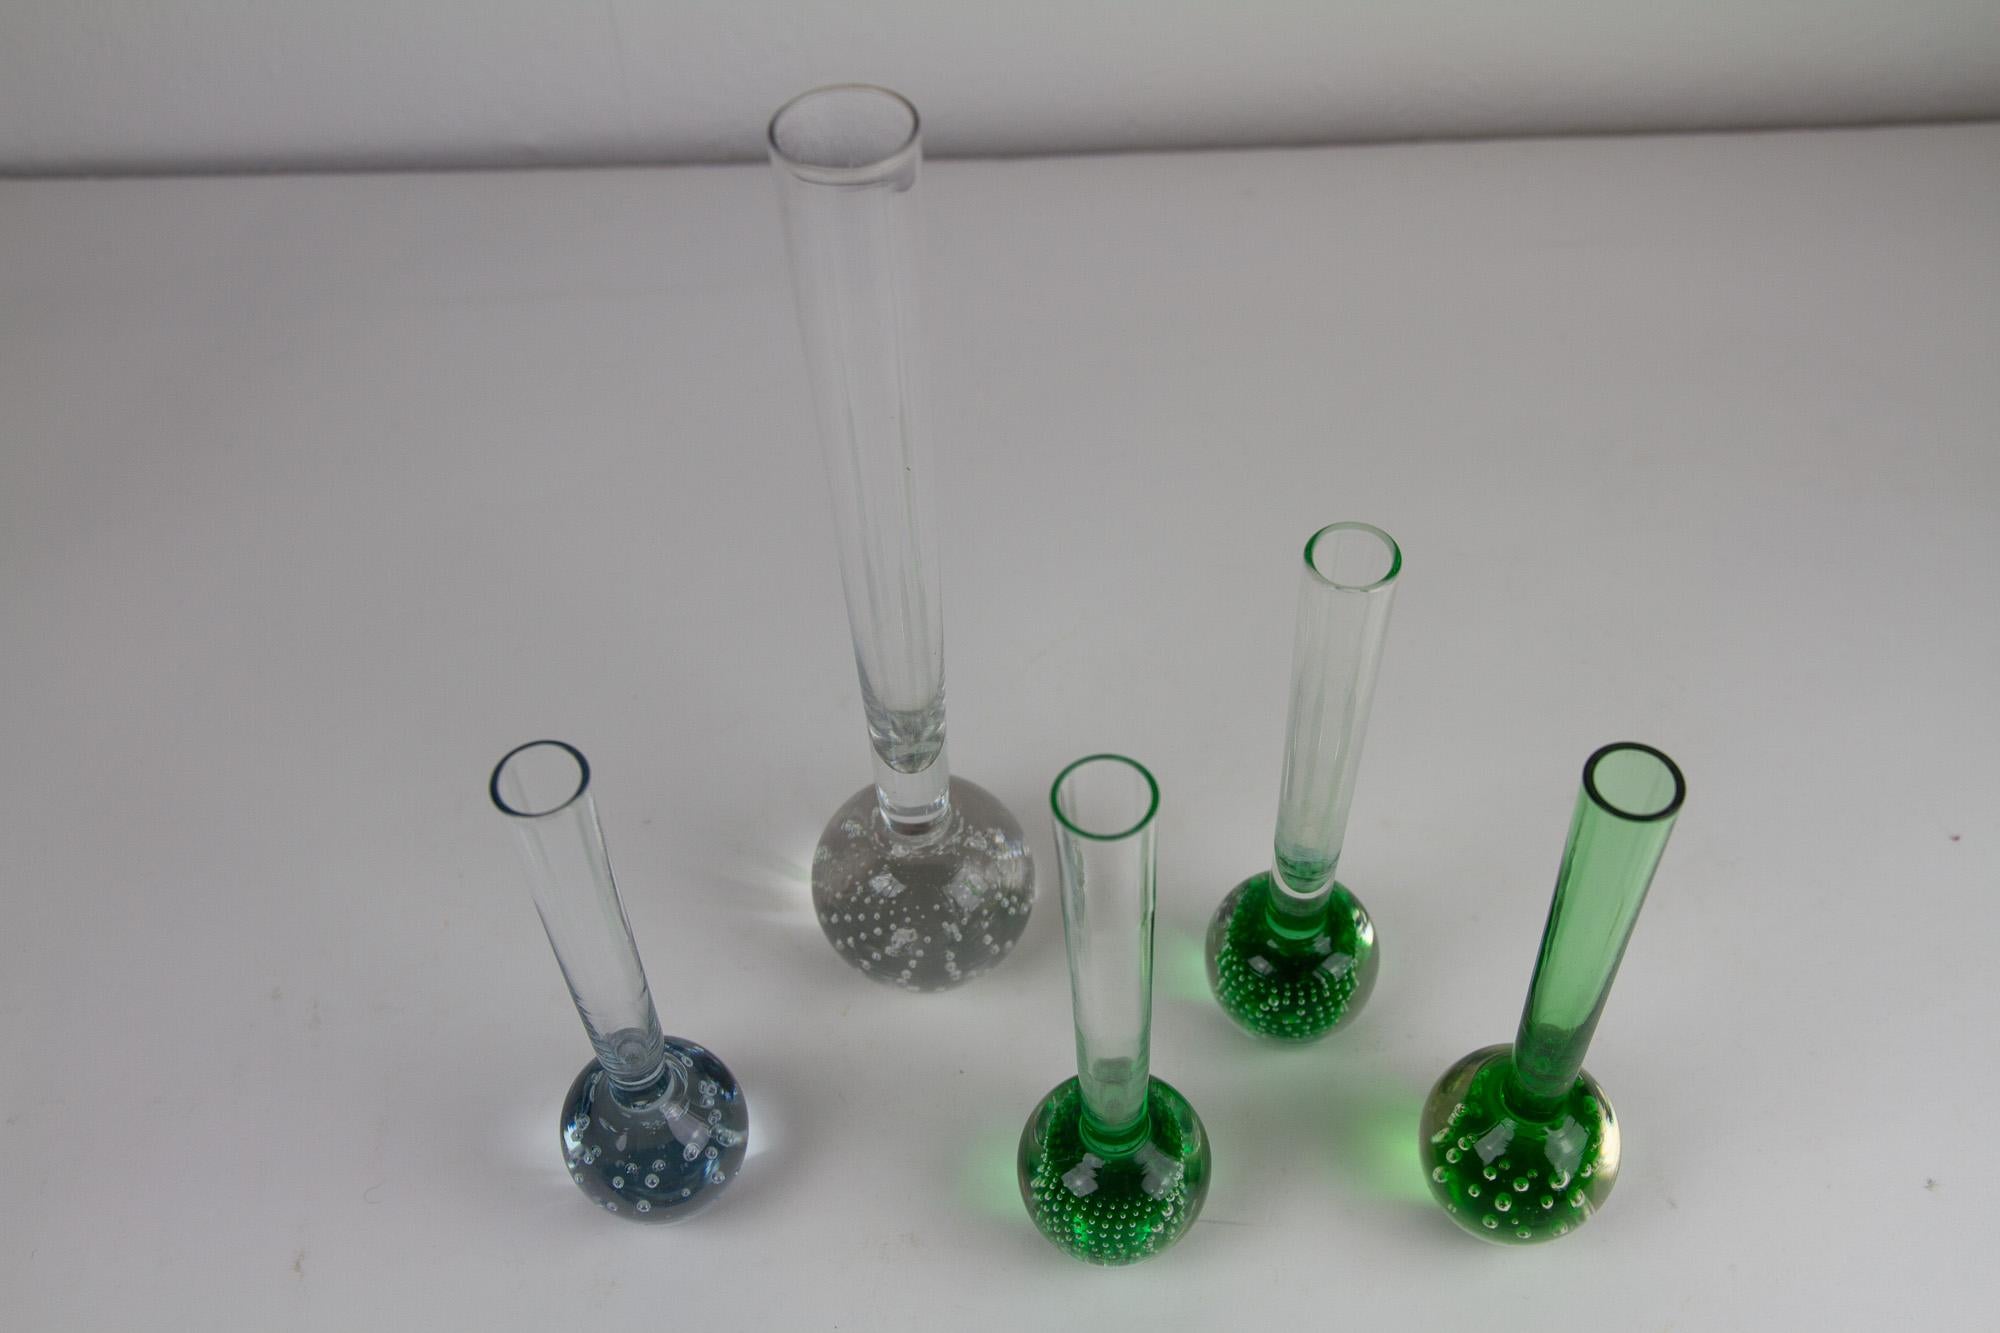 Orchid Bubble vases by Per Lütken for Holmegaard 1950s, Set 5.
These five vintage Danish bubble orchid vases in green and clear glass were designed by Per Lütken for Holmegaard in Denmark in the 1950s. There are all made by hand and the bubble